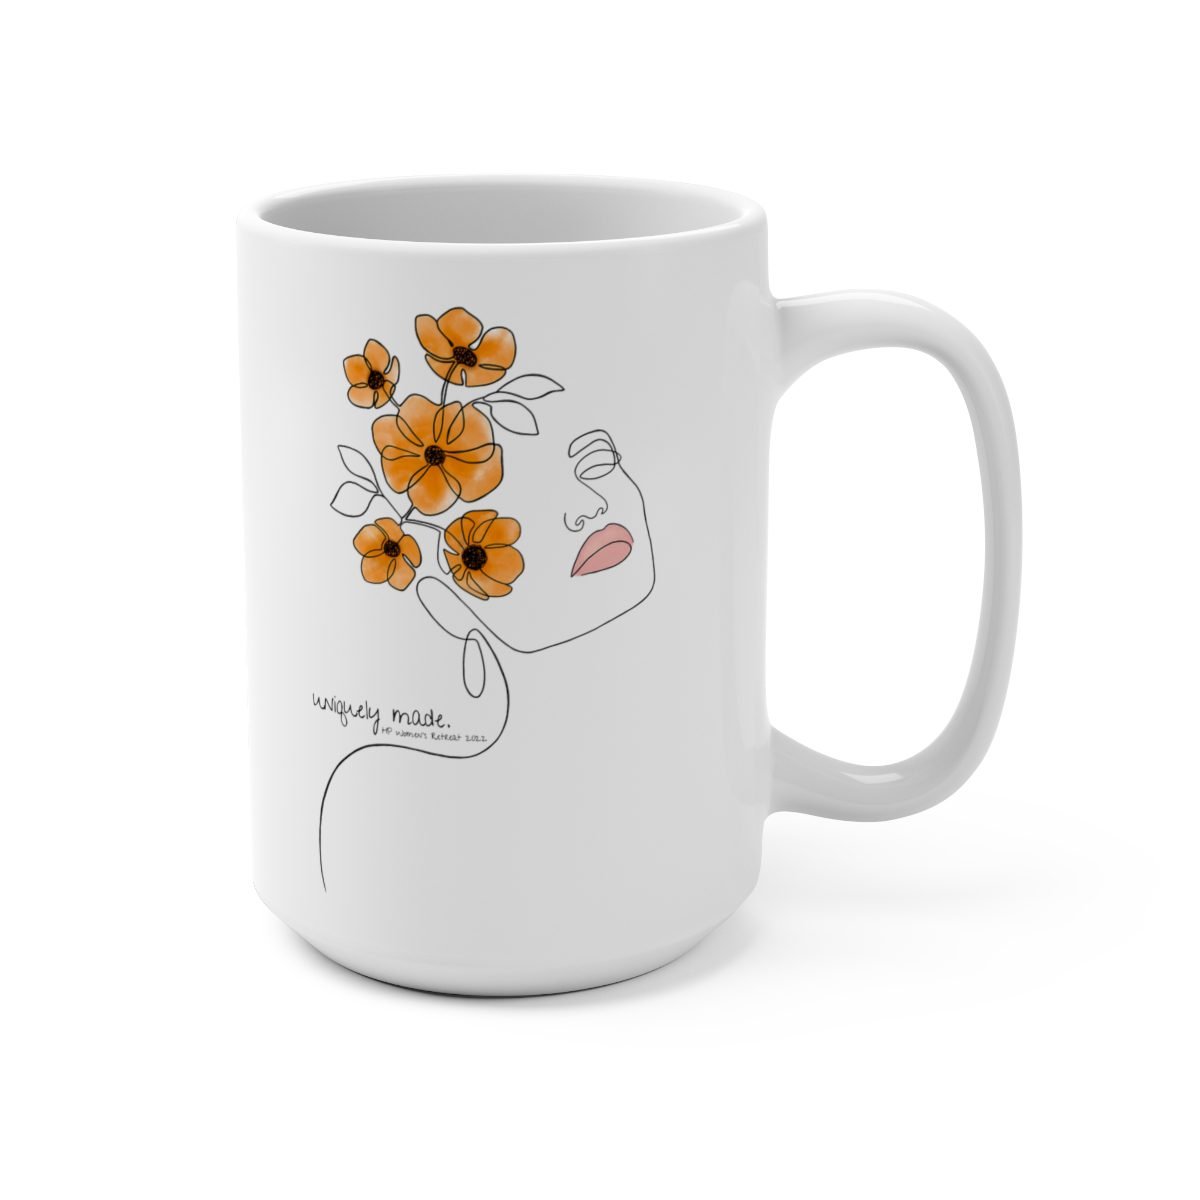 His Place Women’s Ministry – Uniquely Made 15oz White Mug